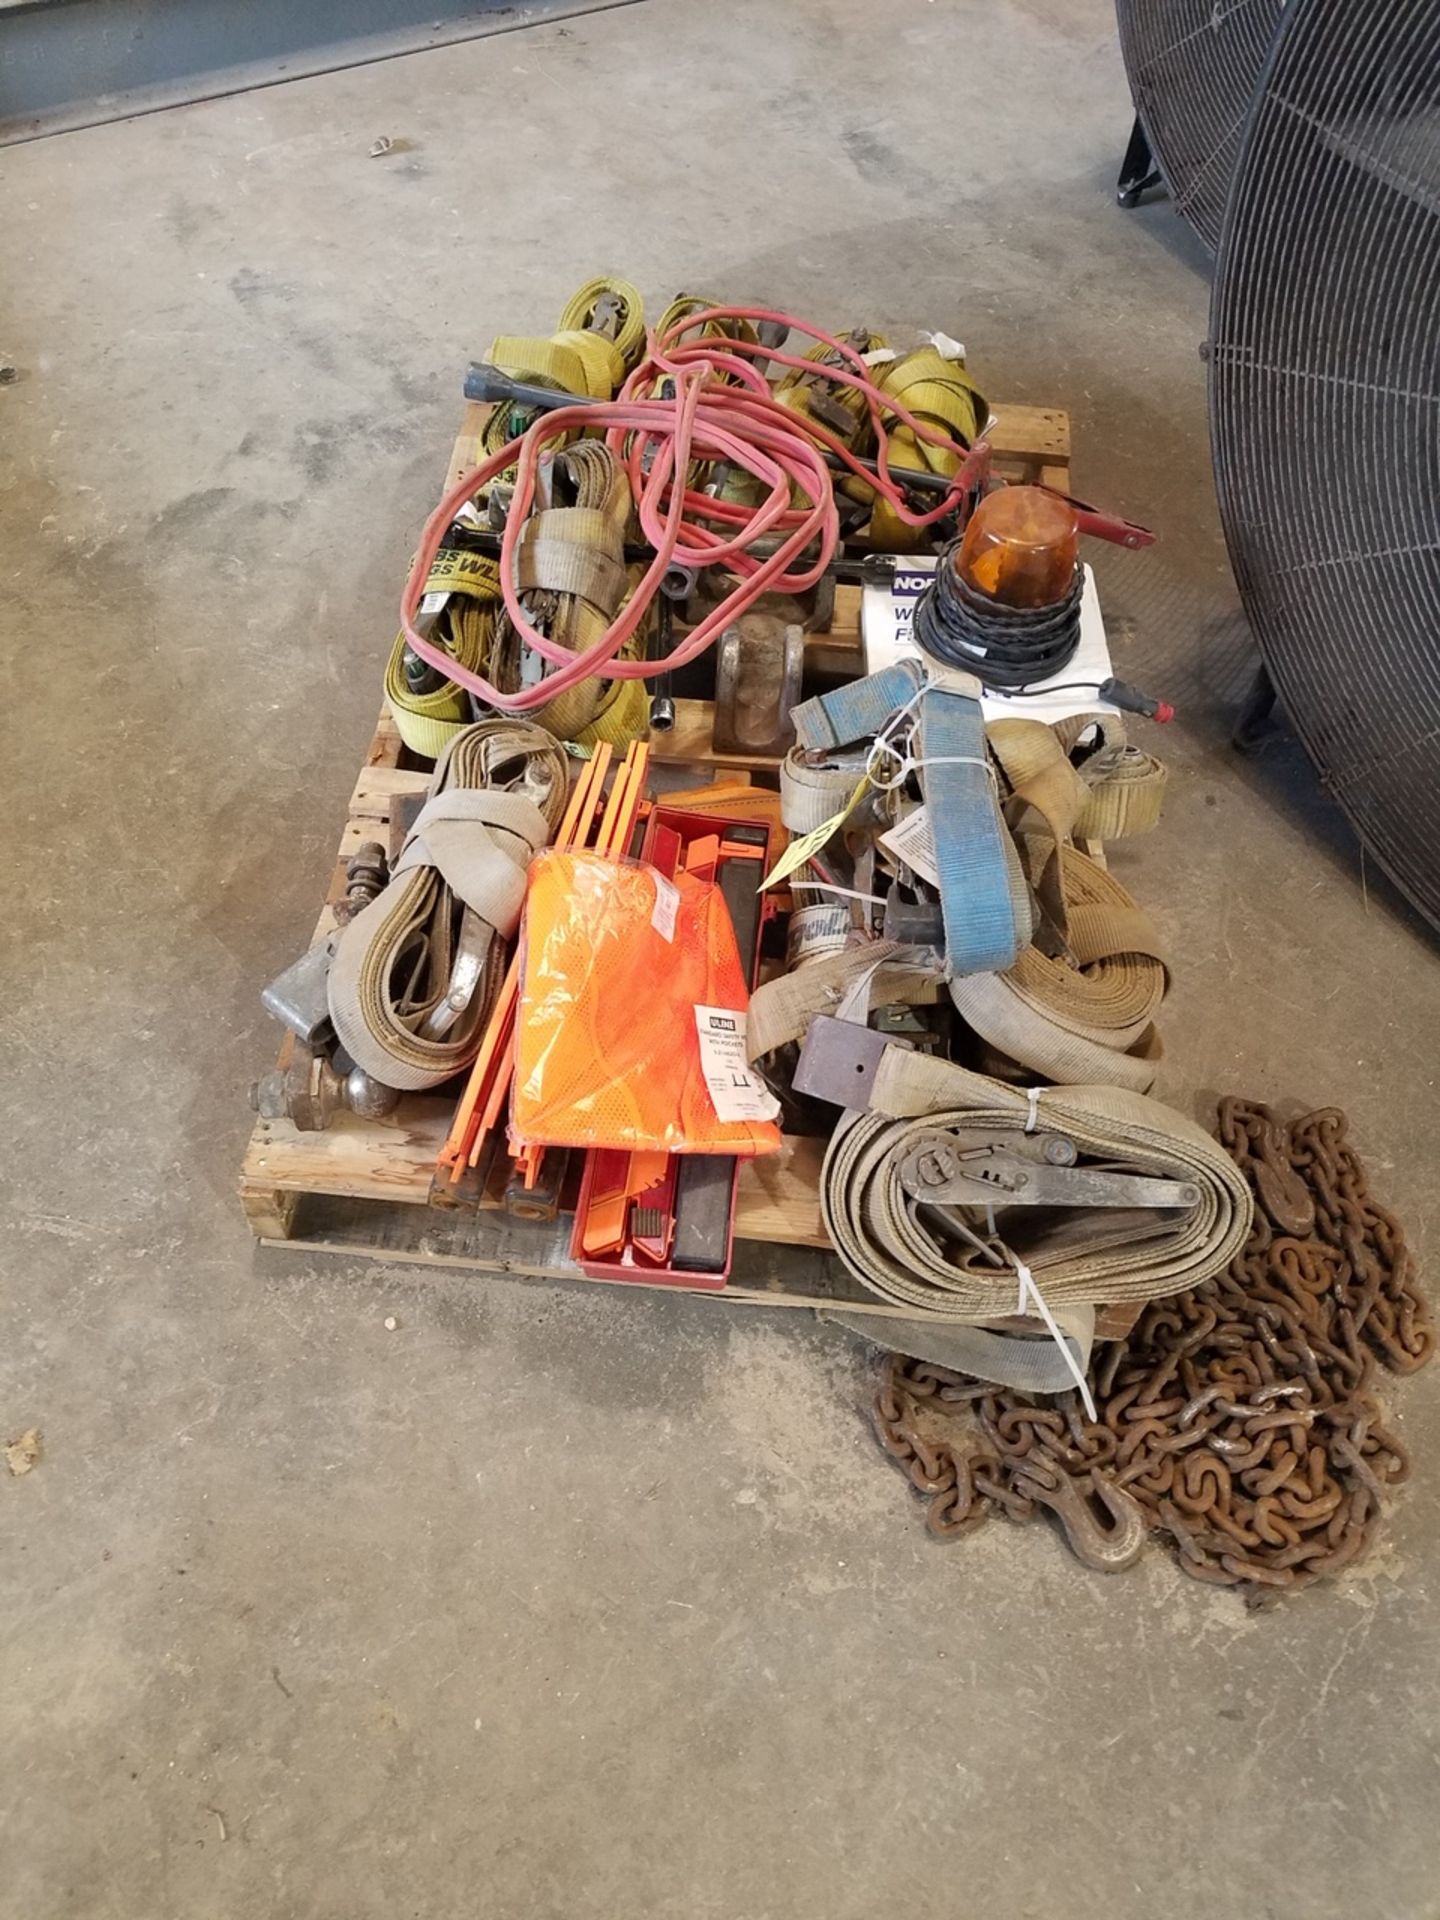 LOT CONSISTING OF: chain, binders, rigging chain, straps & come-alongs - Image 2 of 2